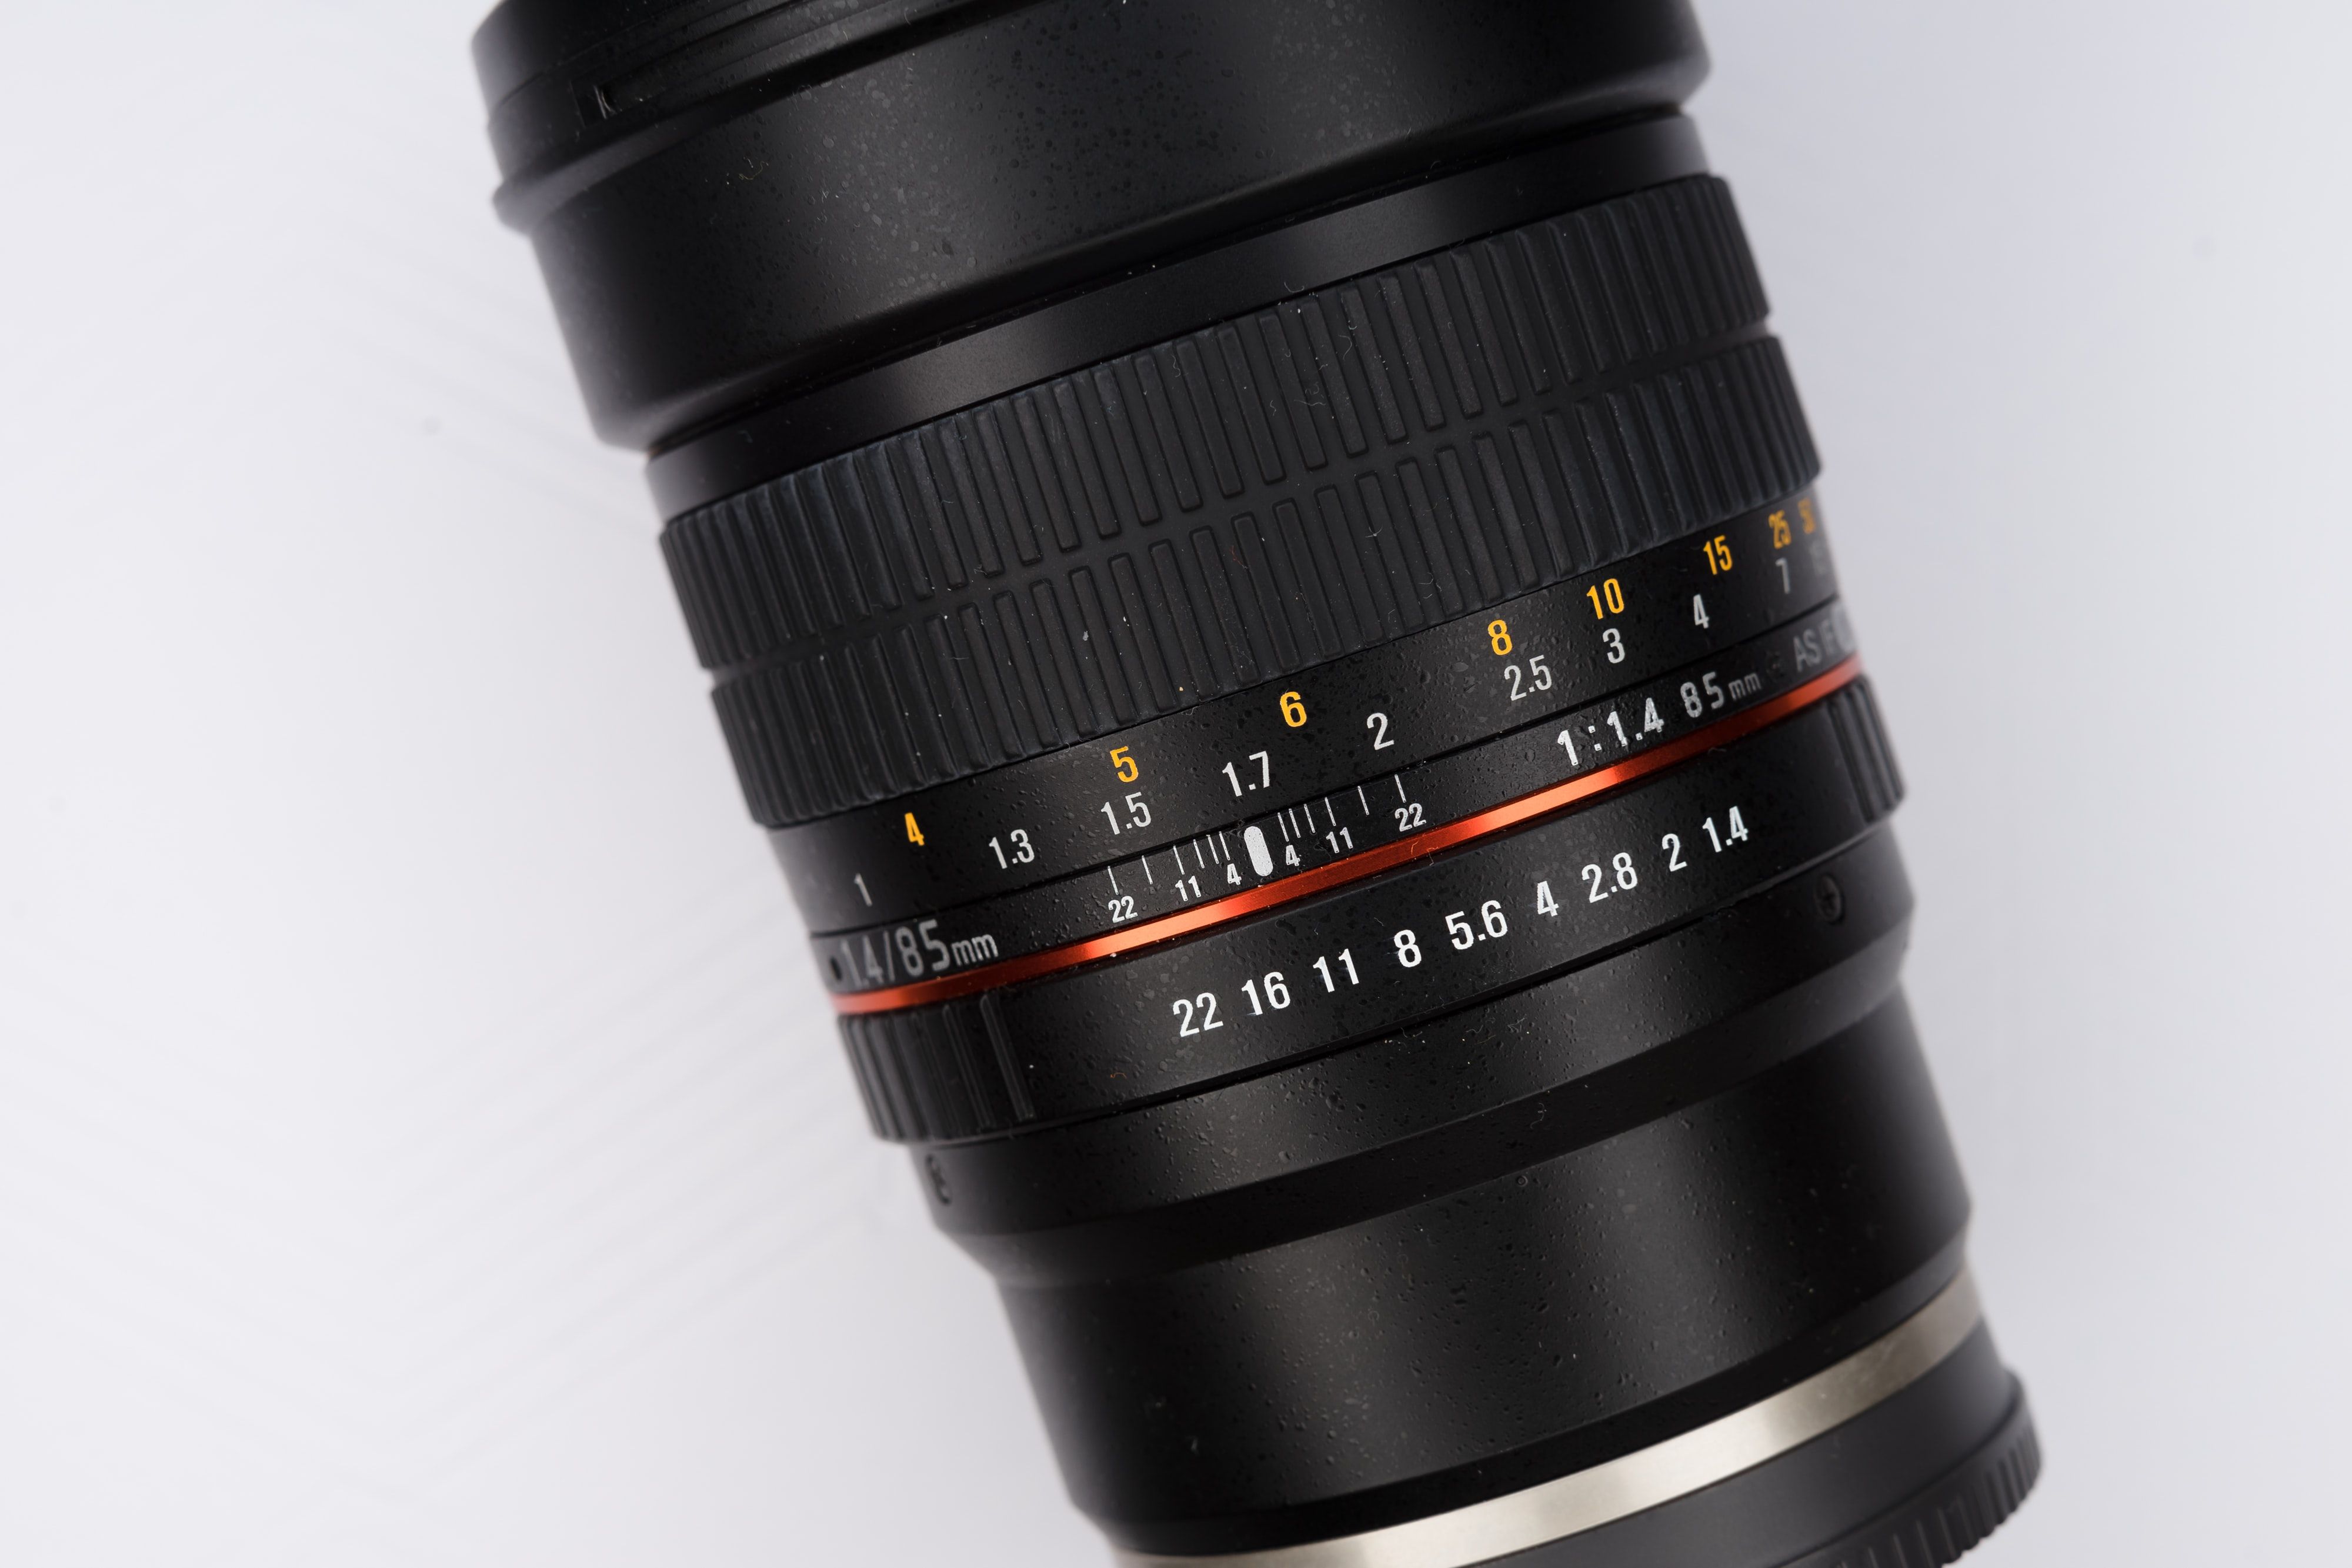 Close-up photo of an 85mm lens